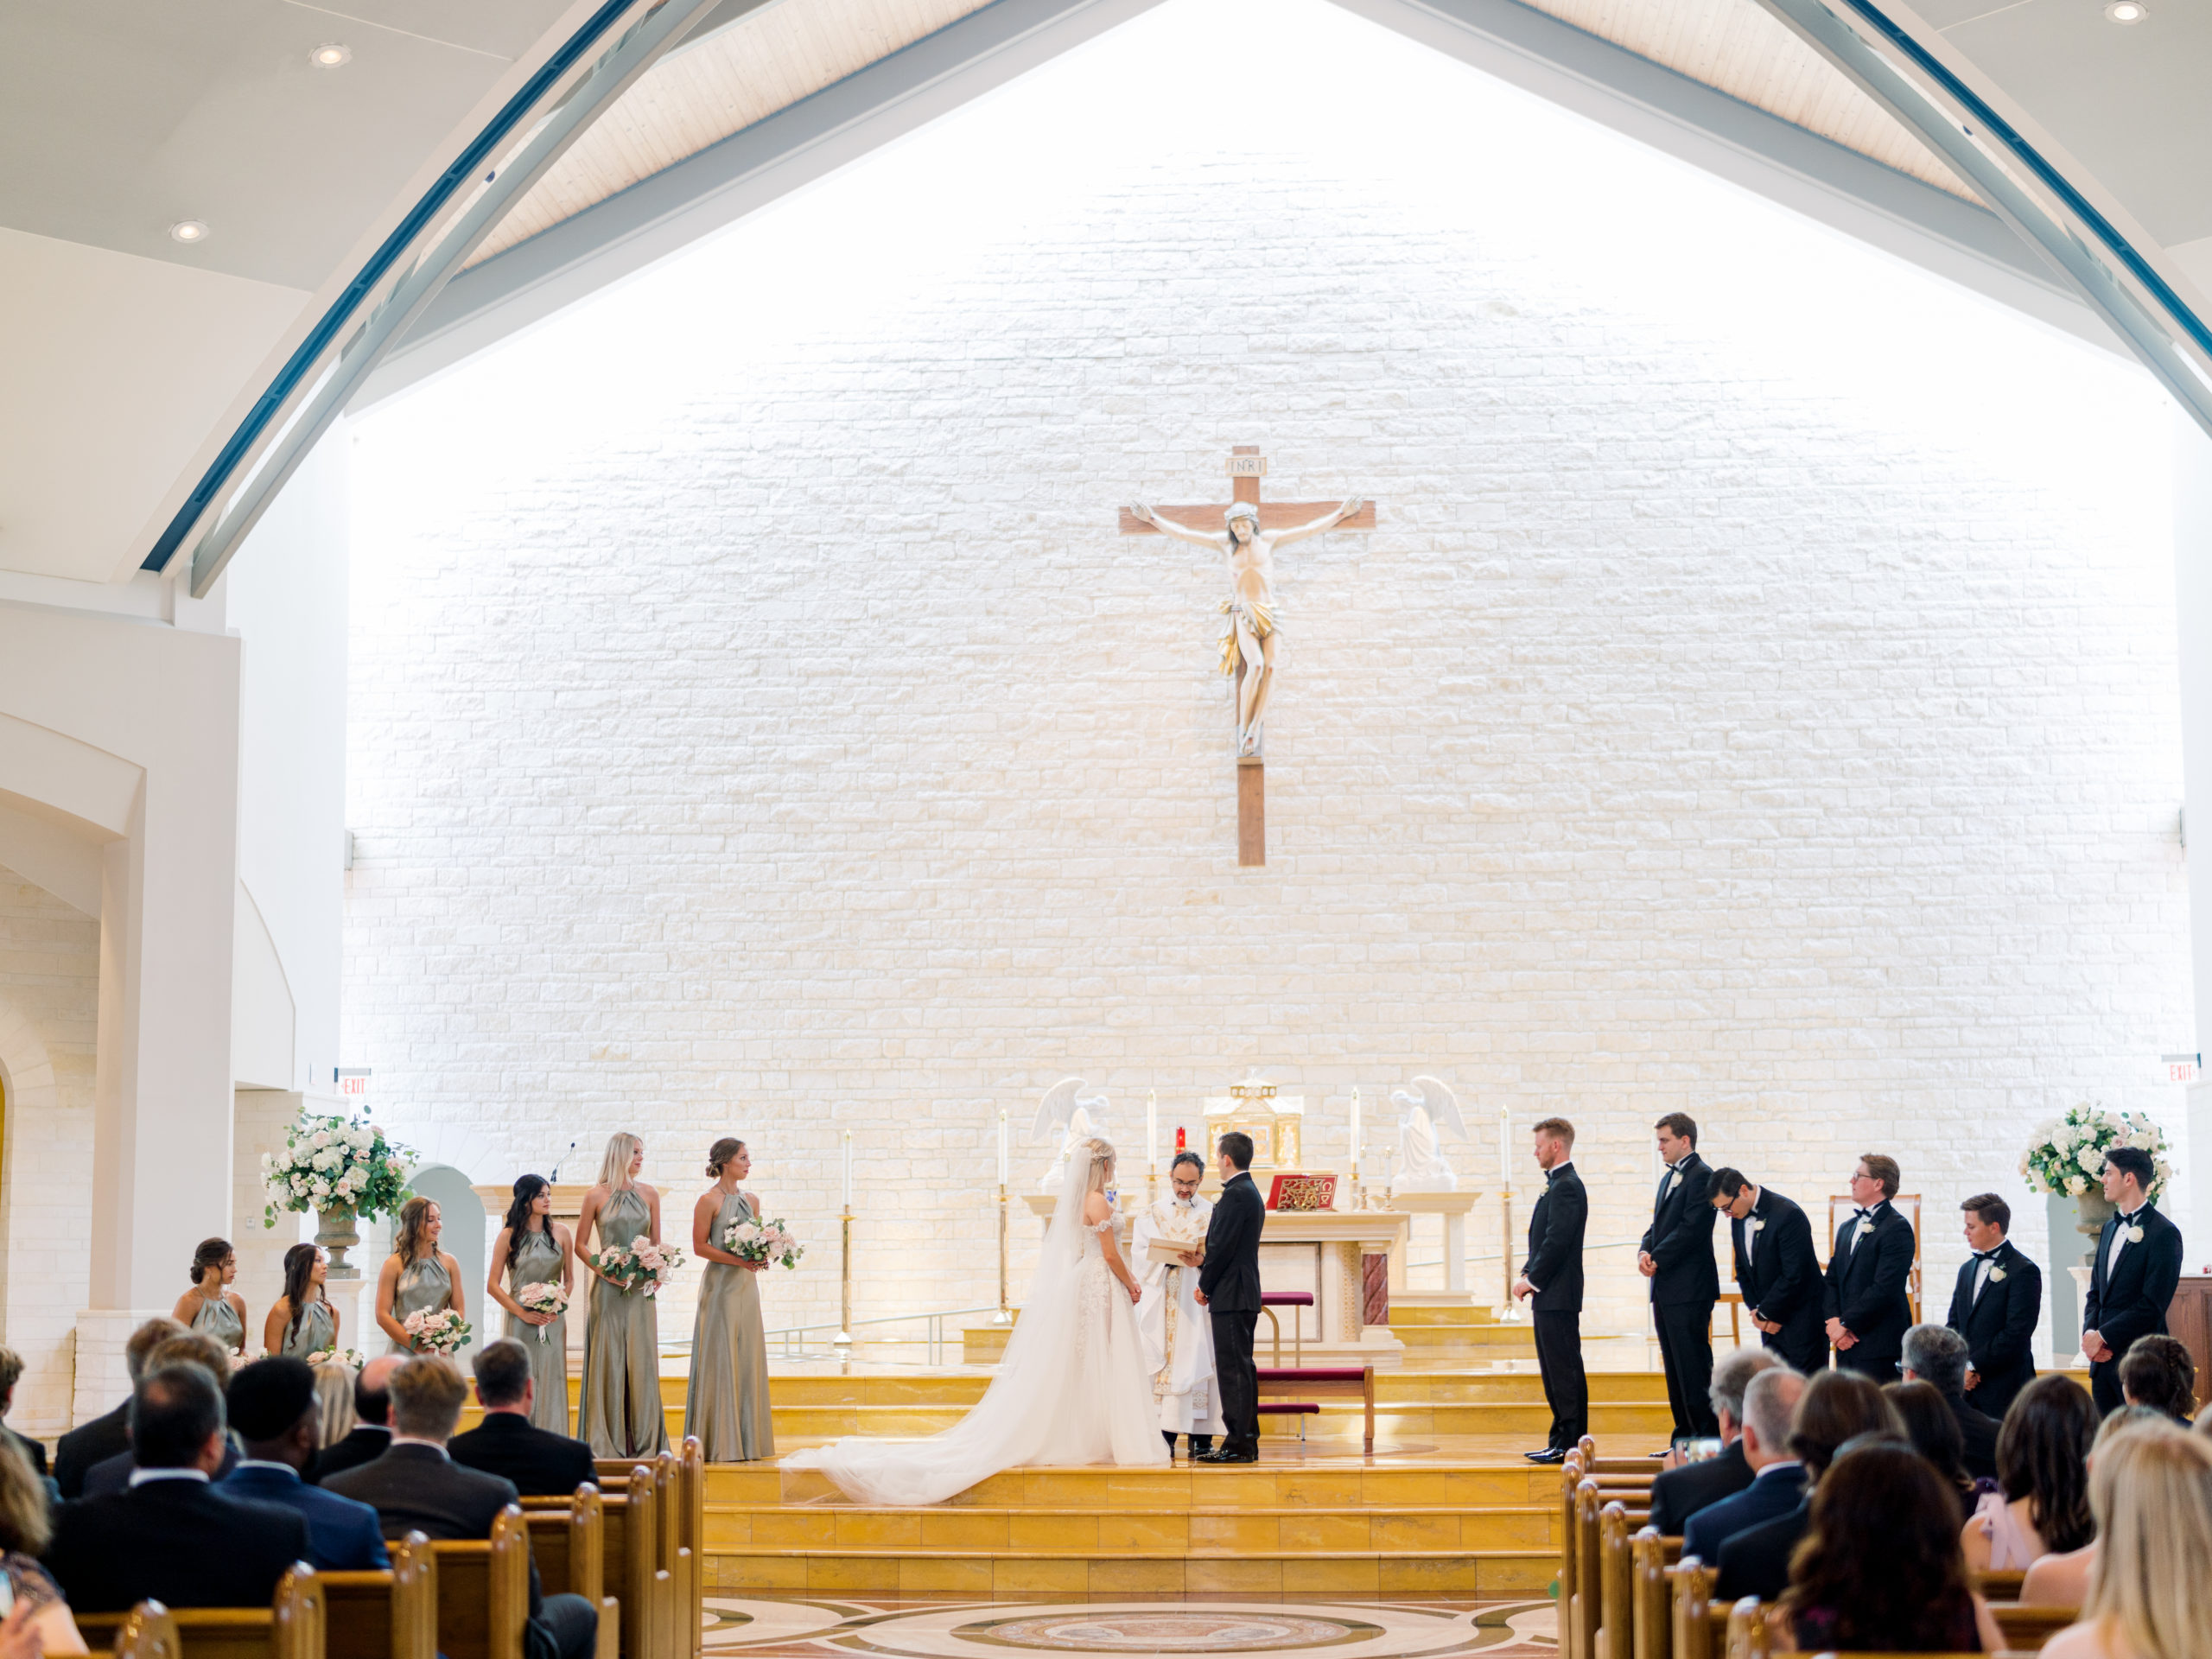 Wedding ceremony happening at the Grace Presbyterian Church, a ten-minute drive away from the Lakeside Country Club